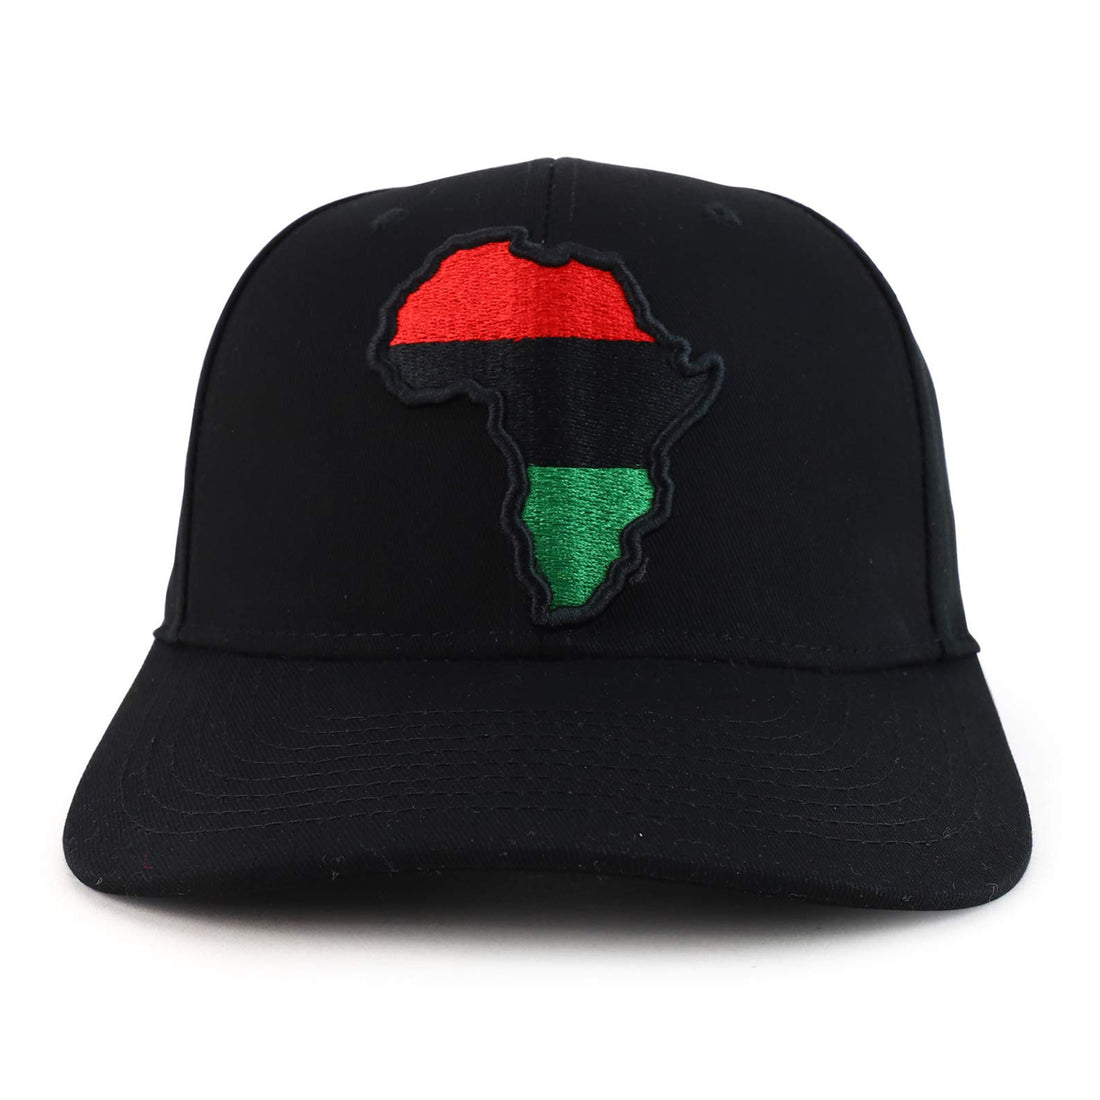 Trendy Apparel Shop Red Black Green Africa Map Embroidered Structured Baseball Cap